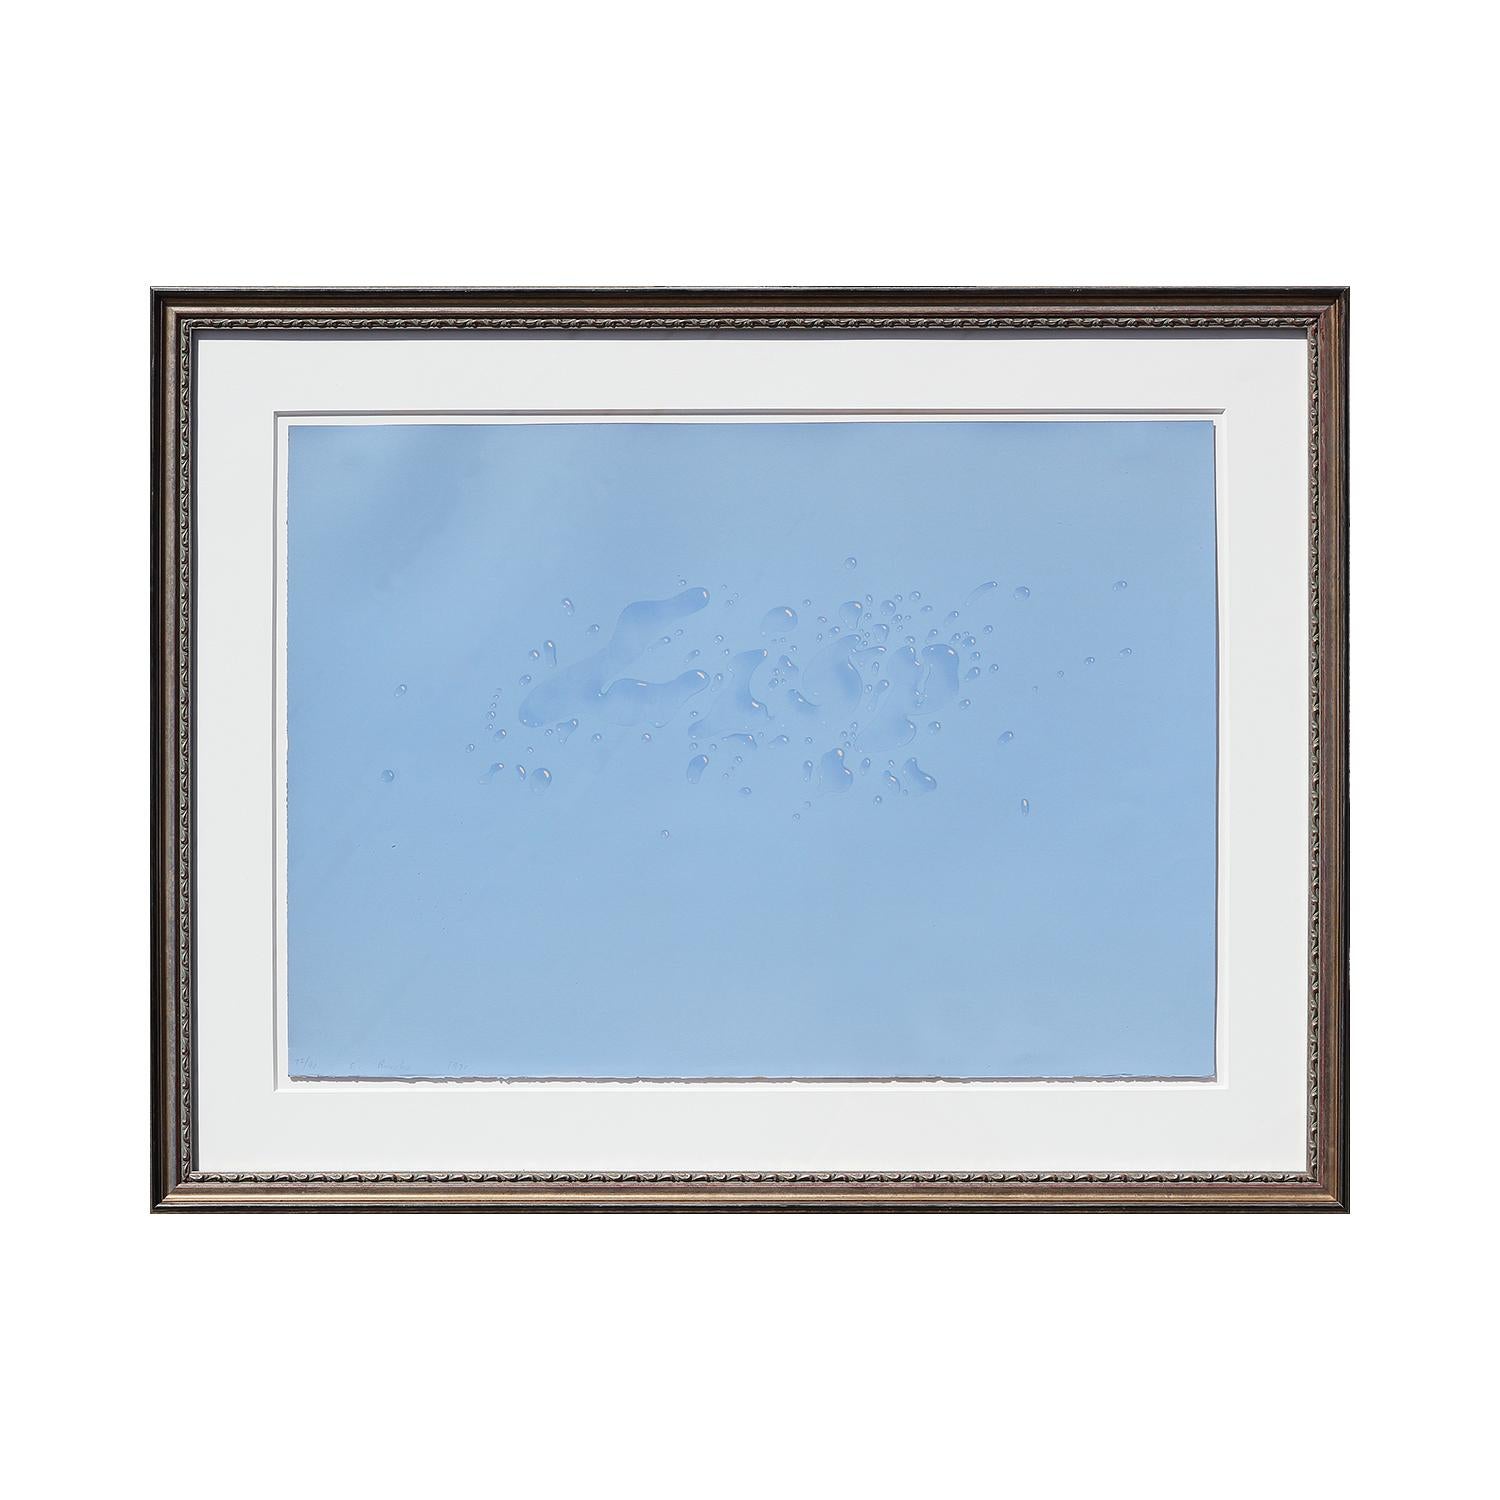 Sky blue conceptual piece by renowned artist, Ed Ruscha. This lithograph depicts the word 